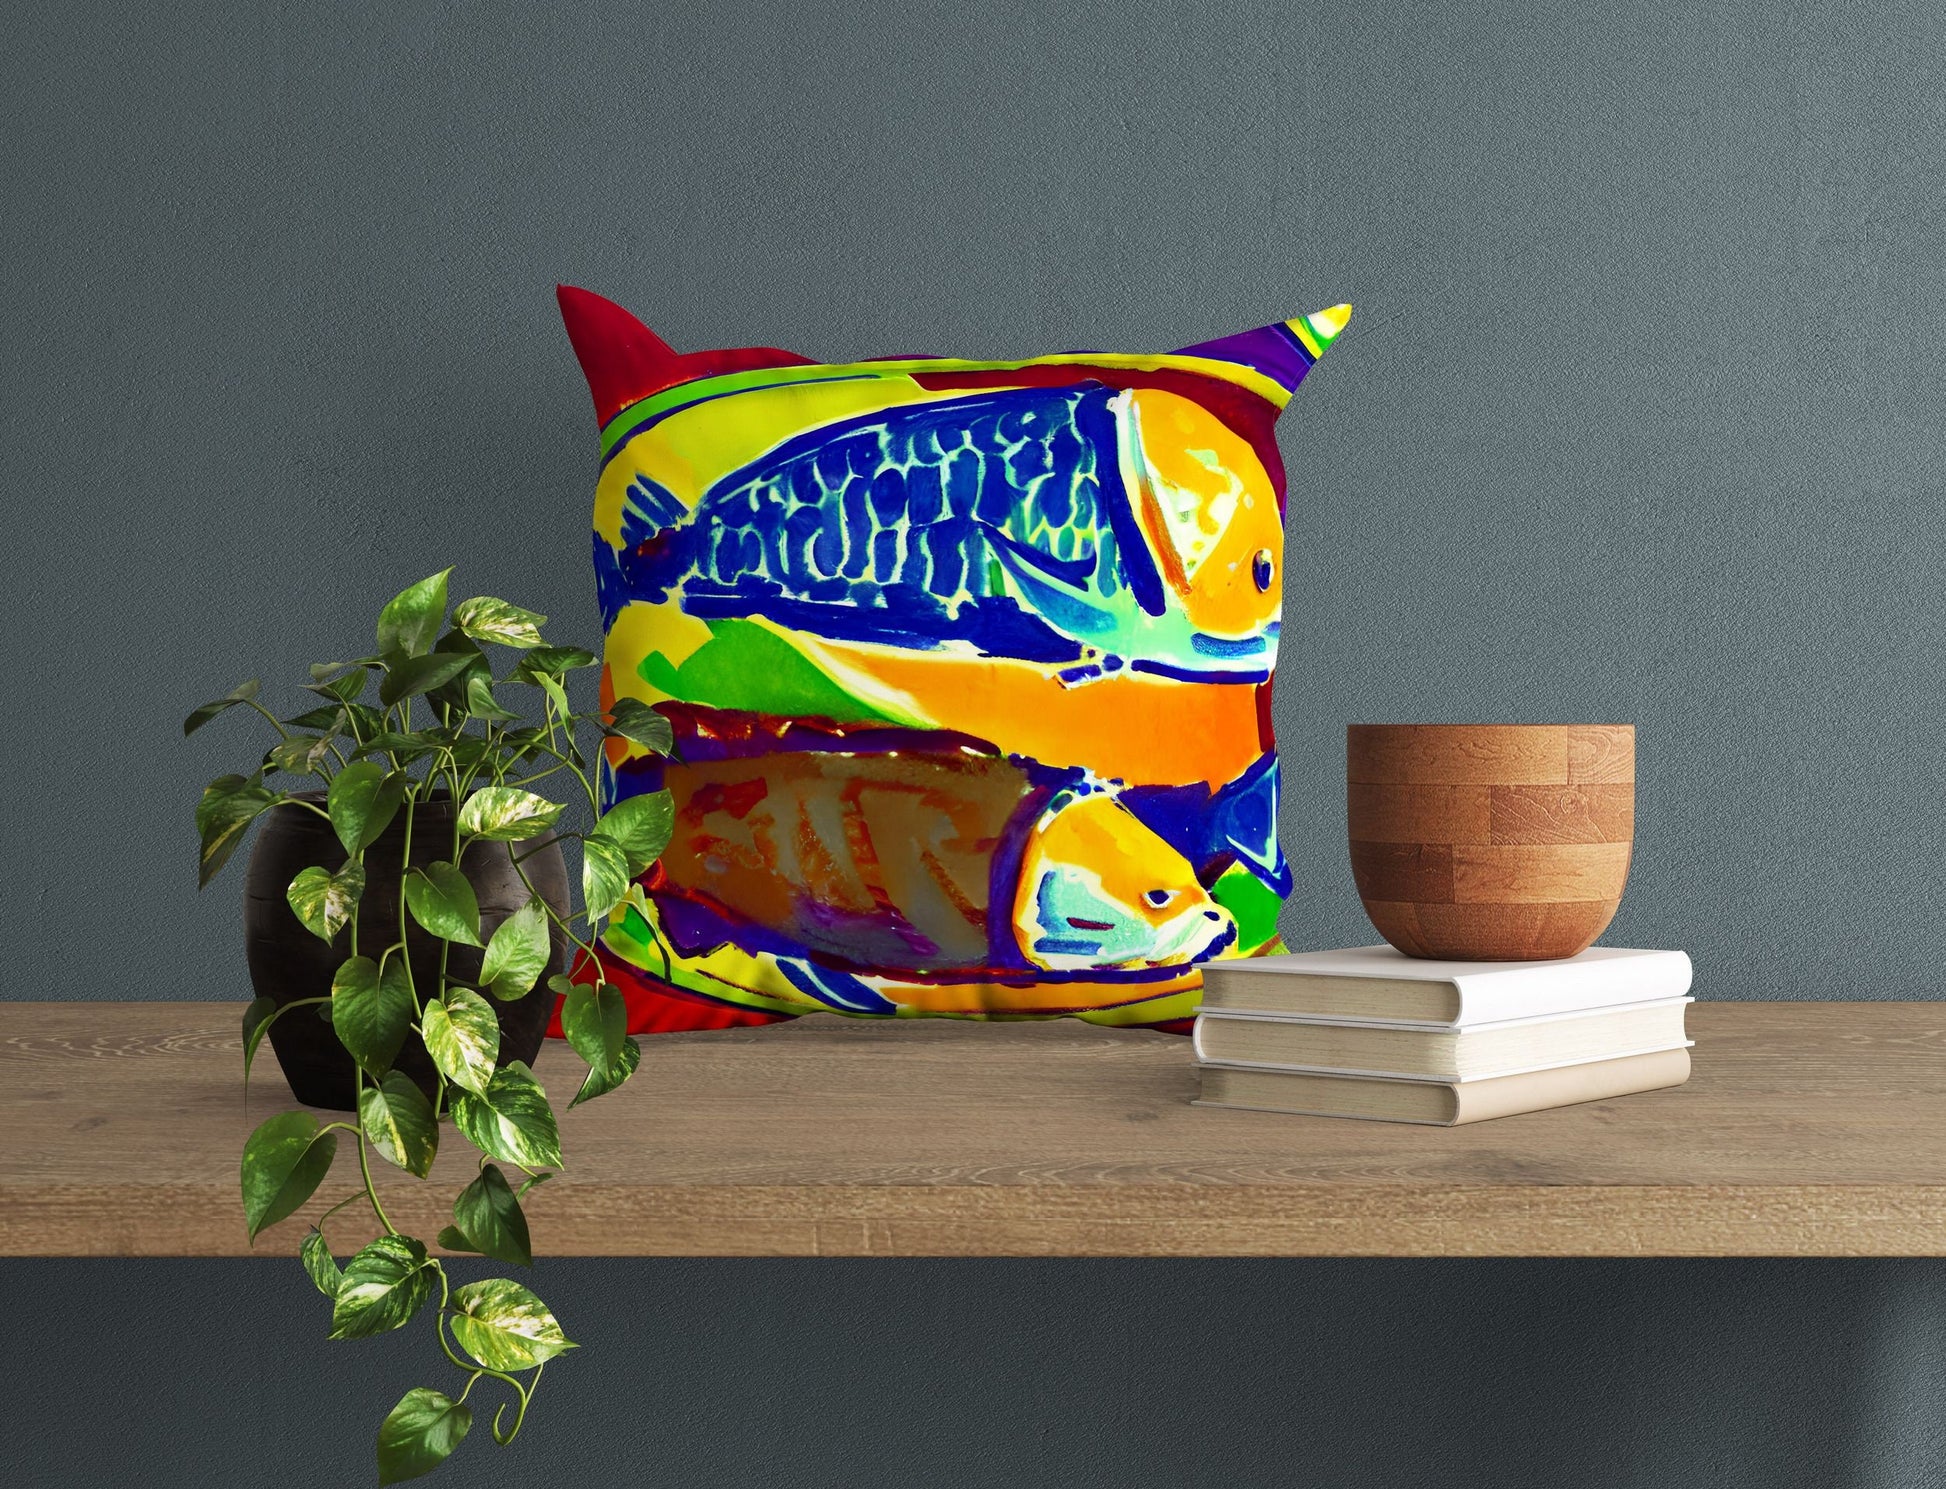 Pan-Fried Fishes Throw Pillow Cover, Abstract Pillow Case, Designer Pillow, Colorful Pillow Case, Housewarming Gift, Abstract Decor